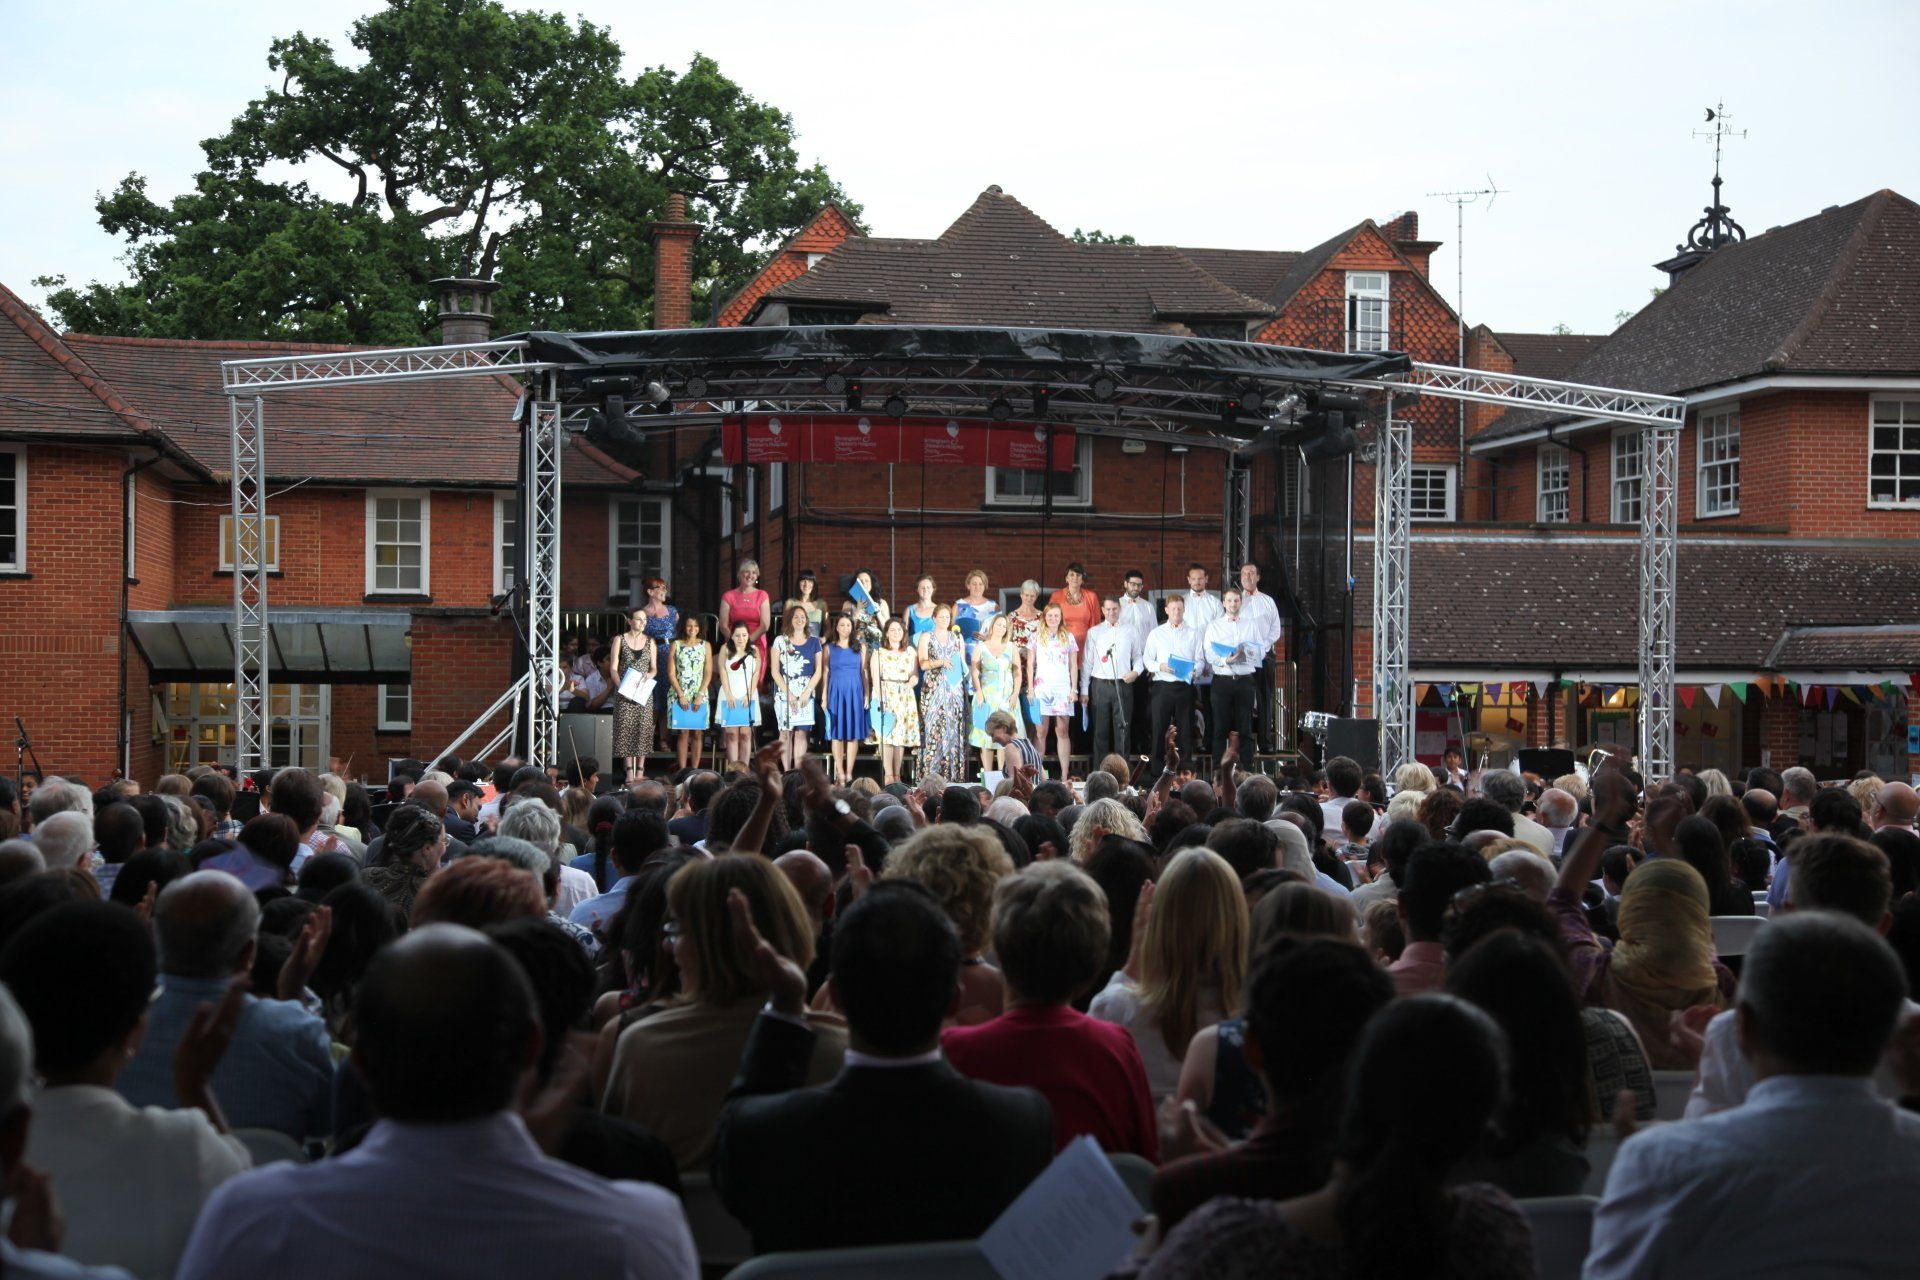 A choir performing on the trailer stage at an outdoor event